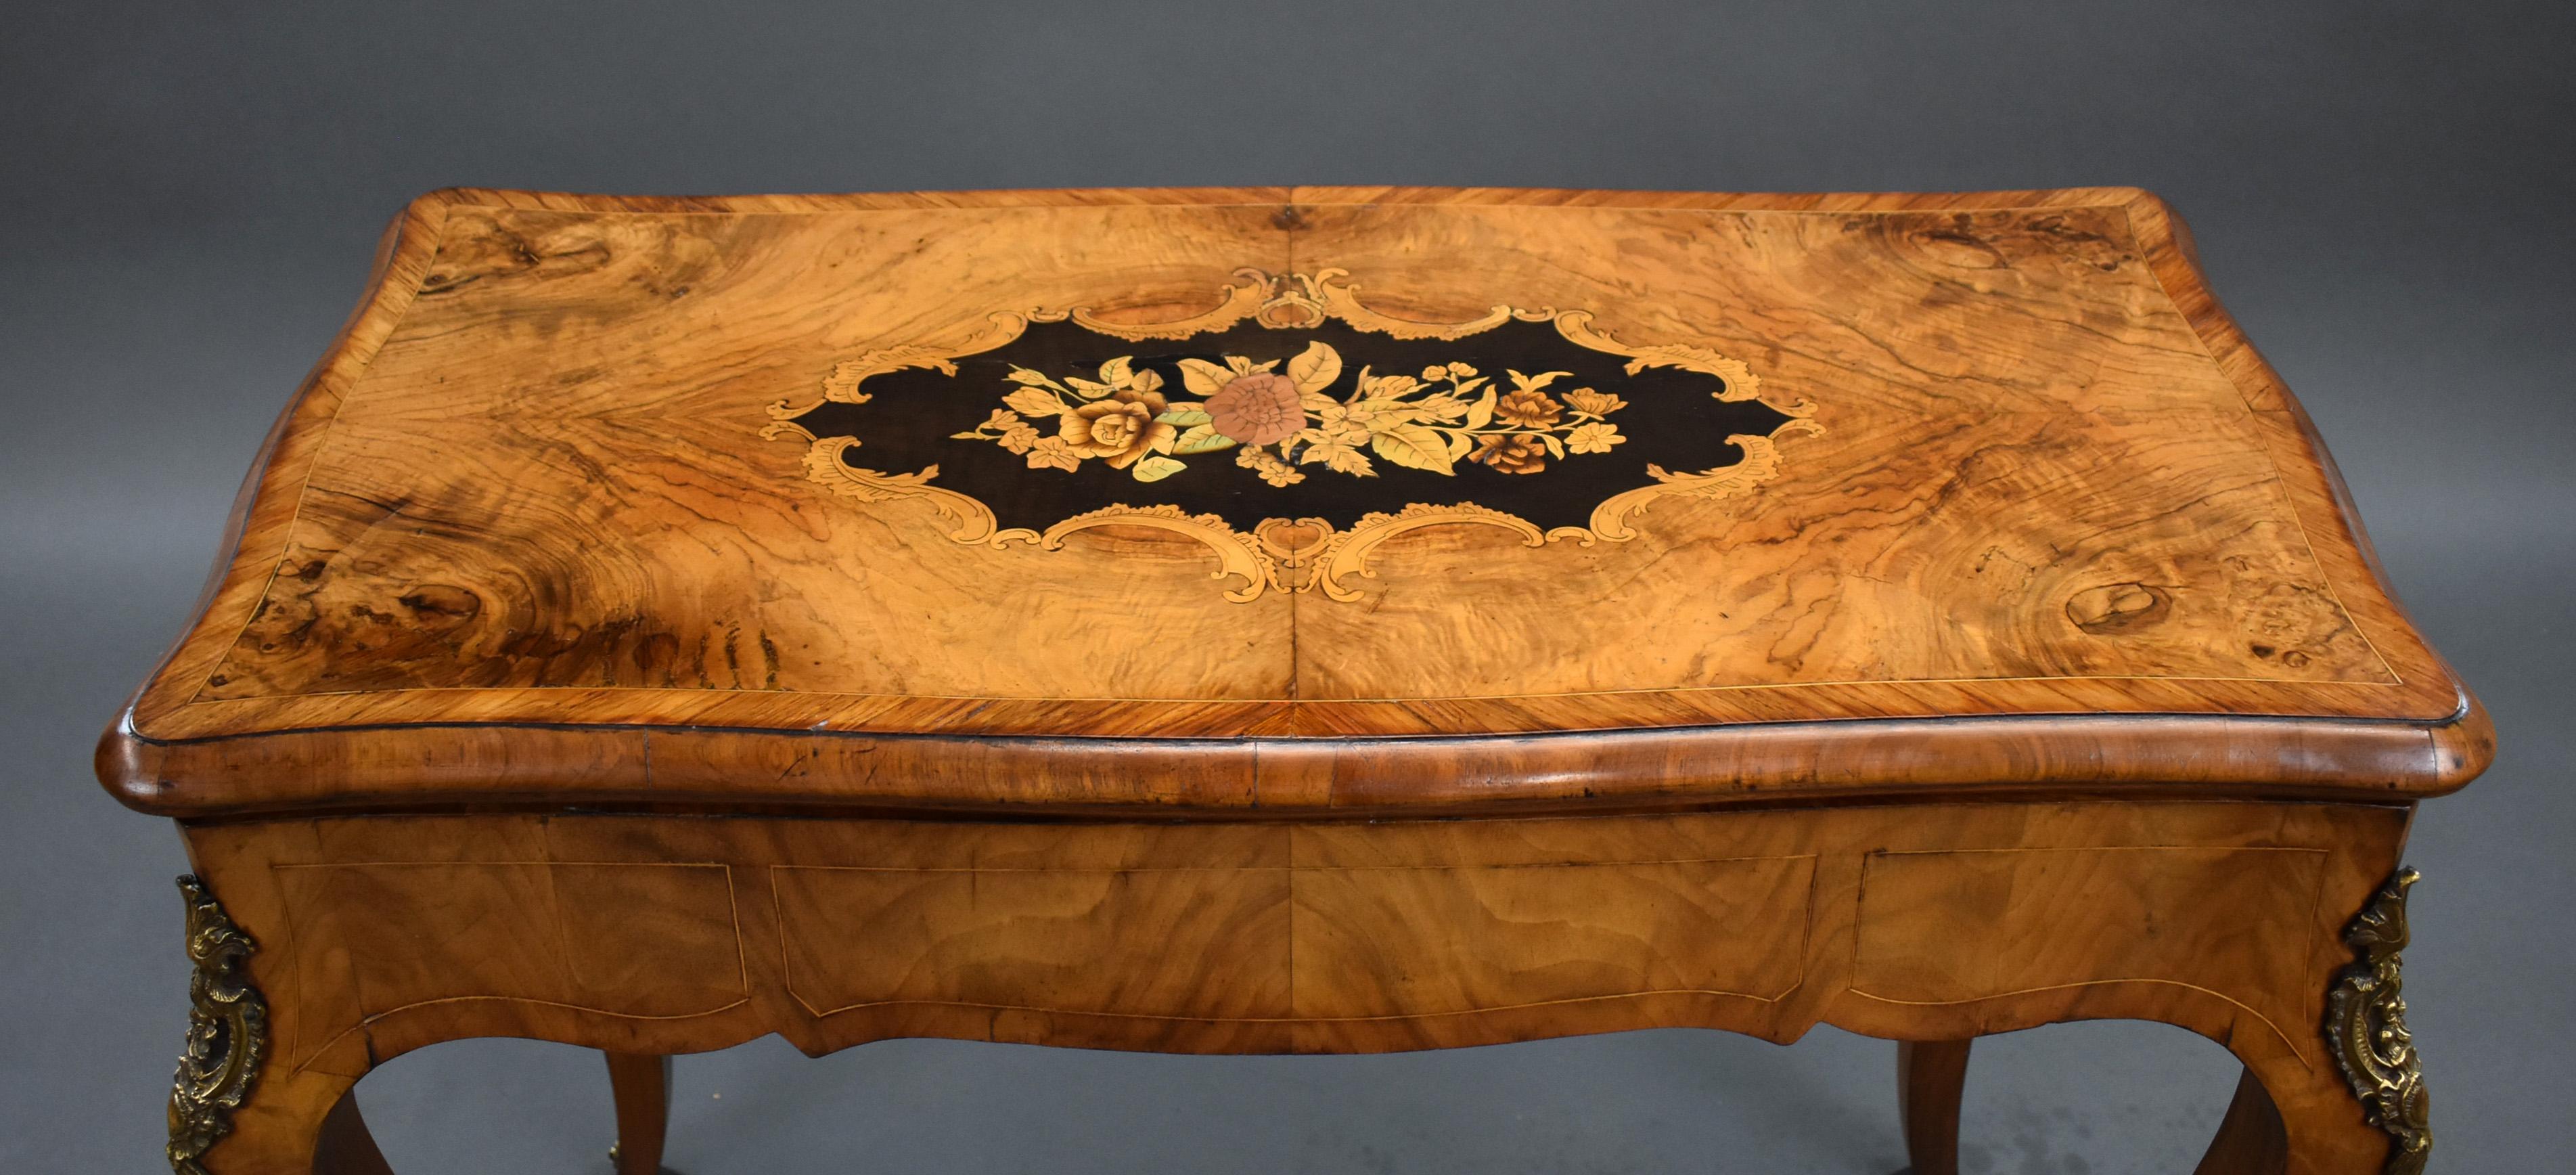 19th Century English Victorian Burl Walnut and Marquetry Inlaid Card Table For Sale 5